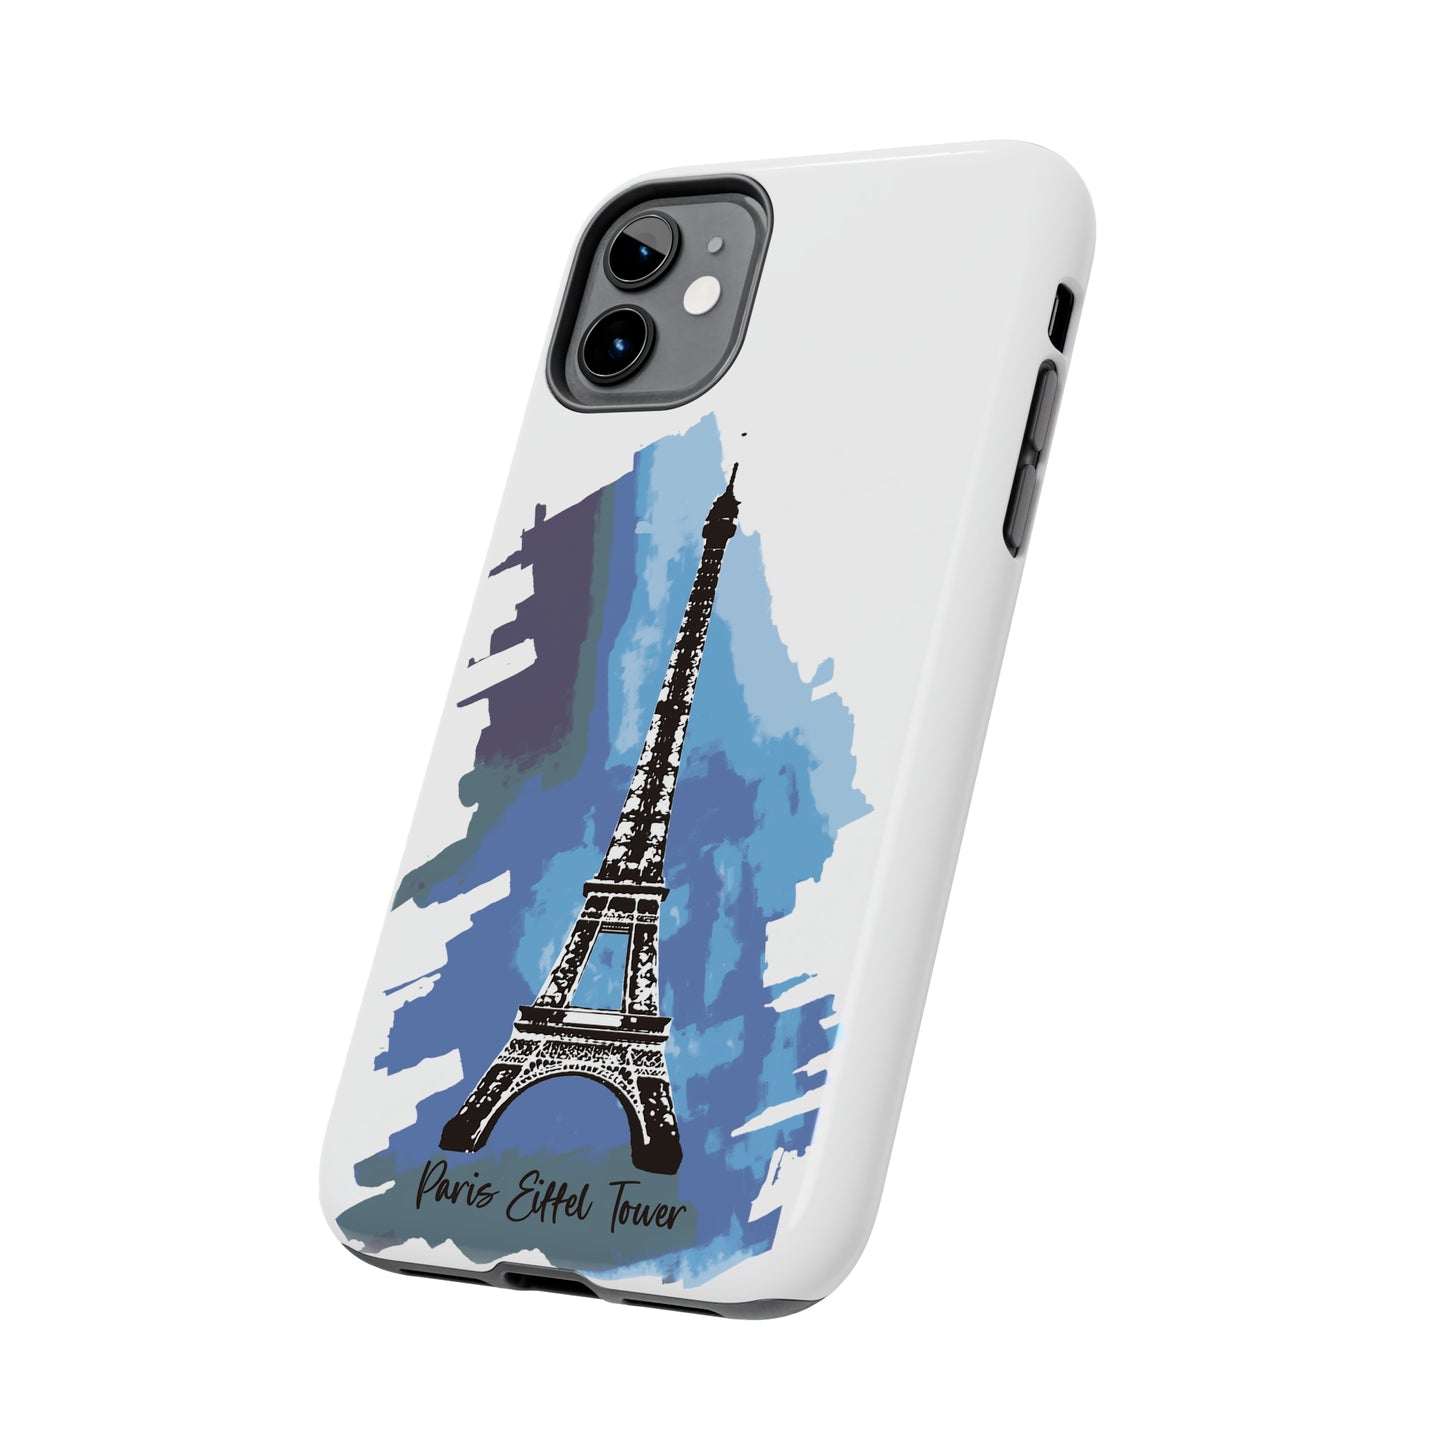 TowerCel-5 Tough iPhone Cases